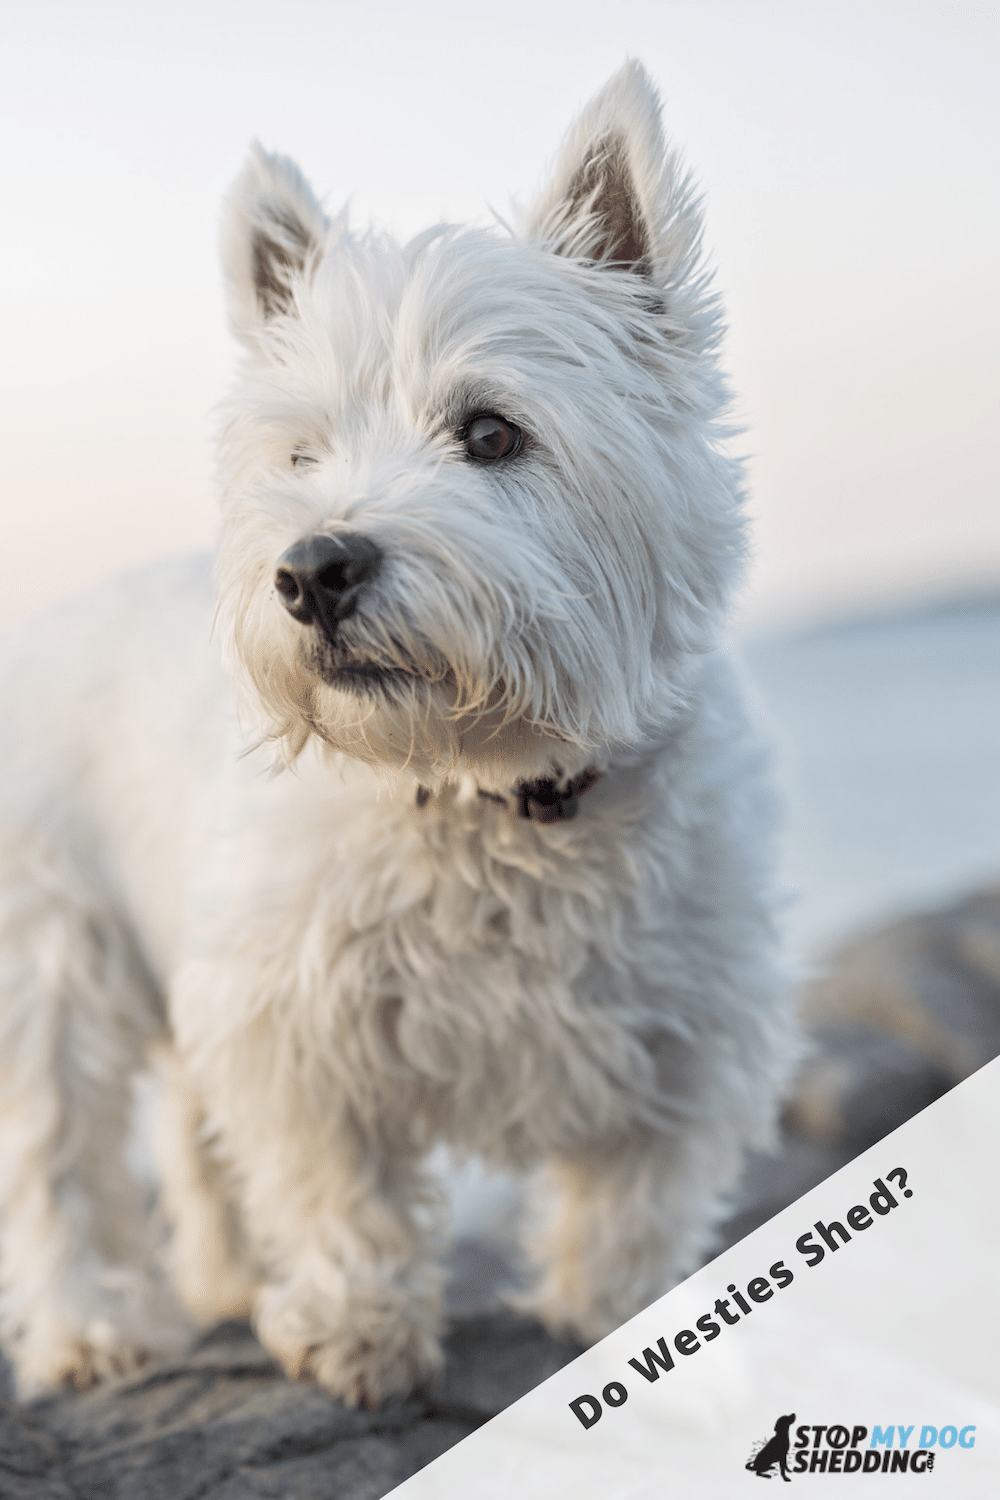 Do West Highland White Terriers Shed?